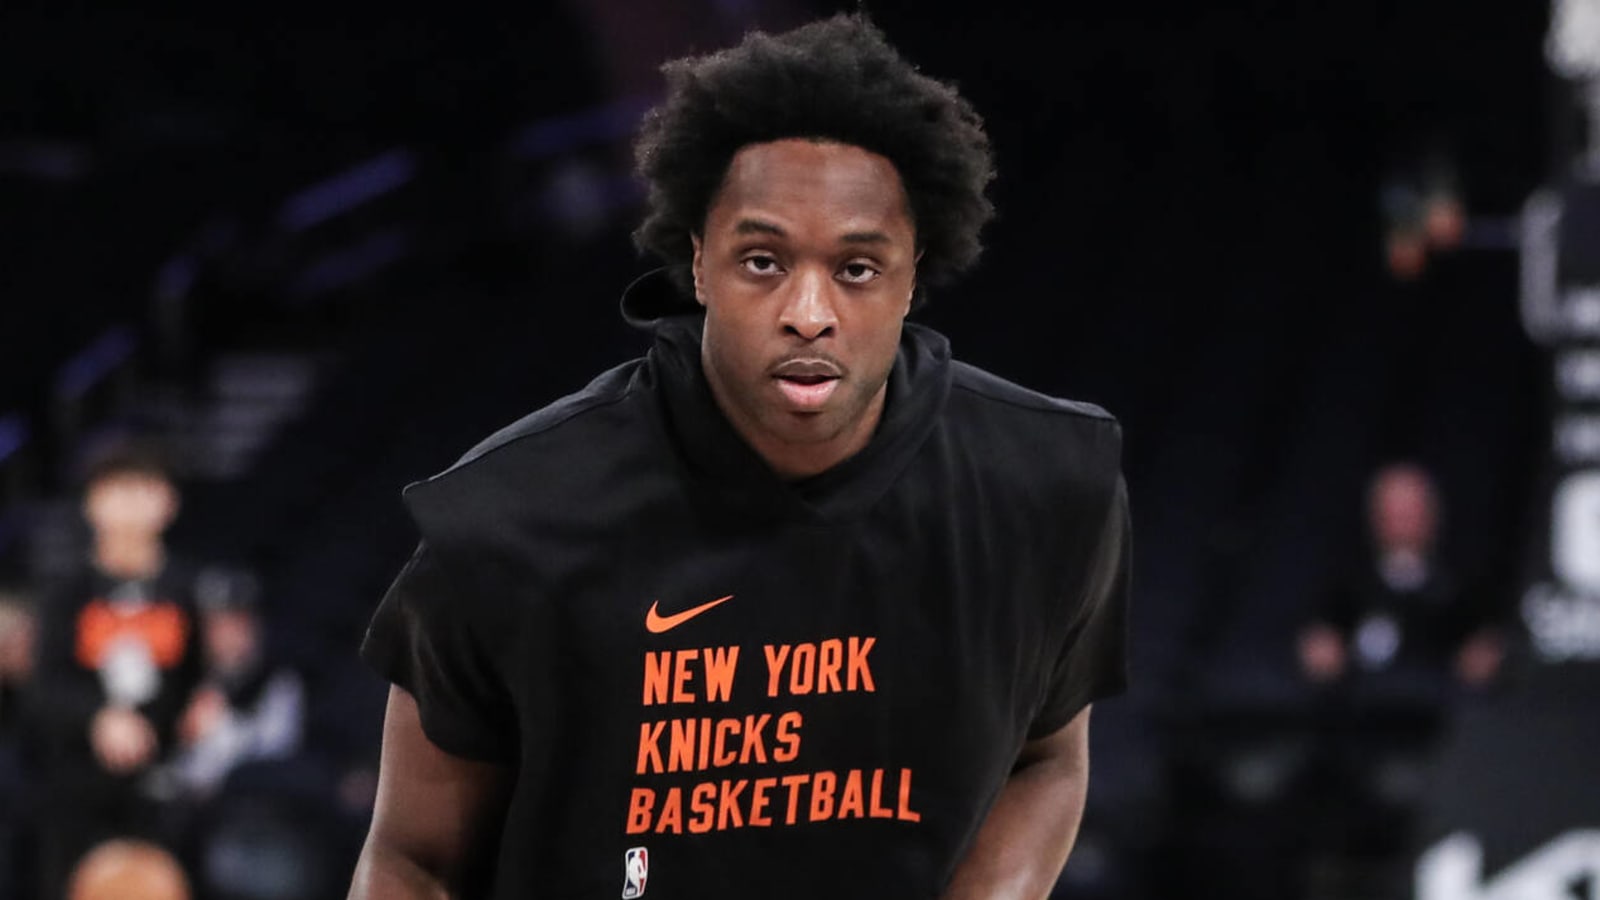 OG Anunoby puts Knicks ahead of the chasing pack